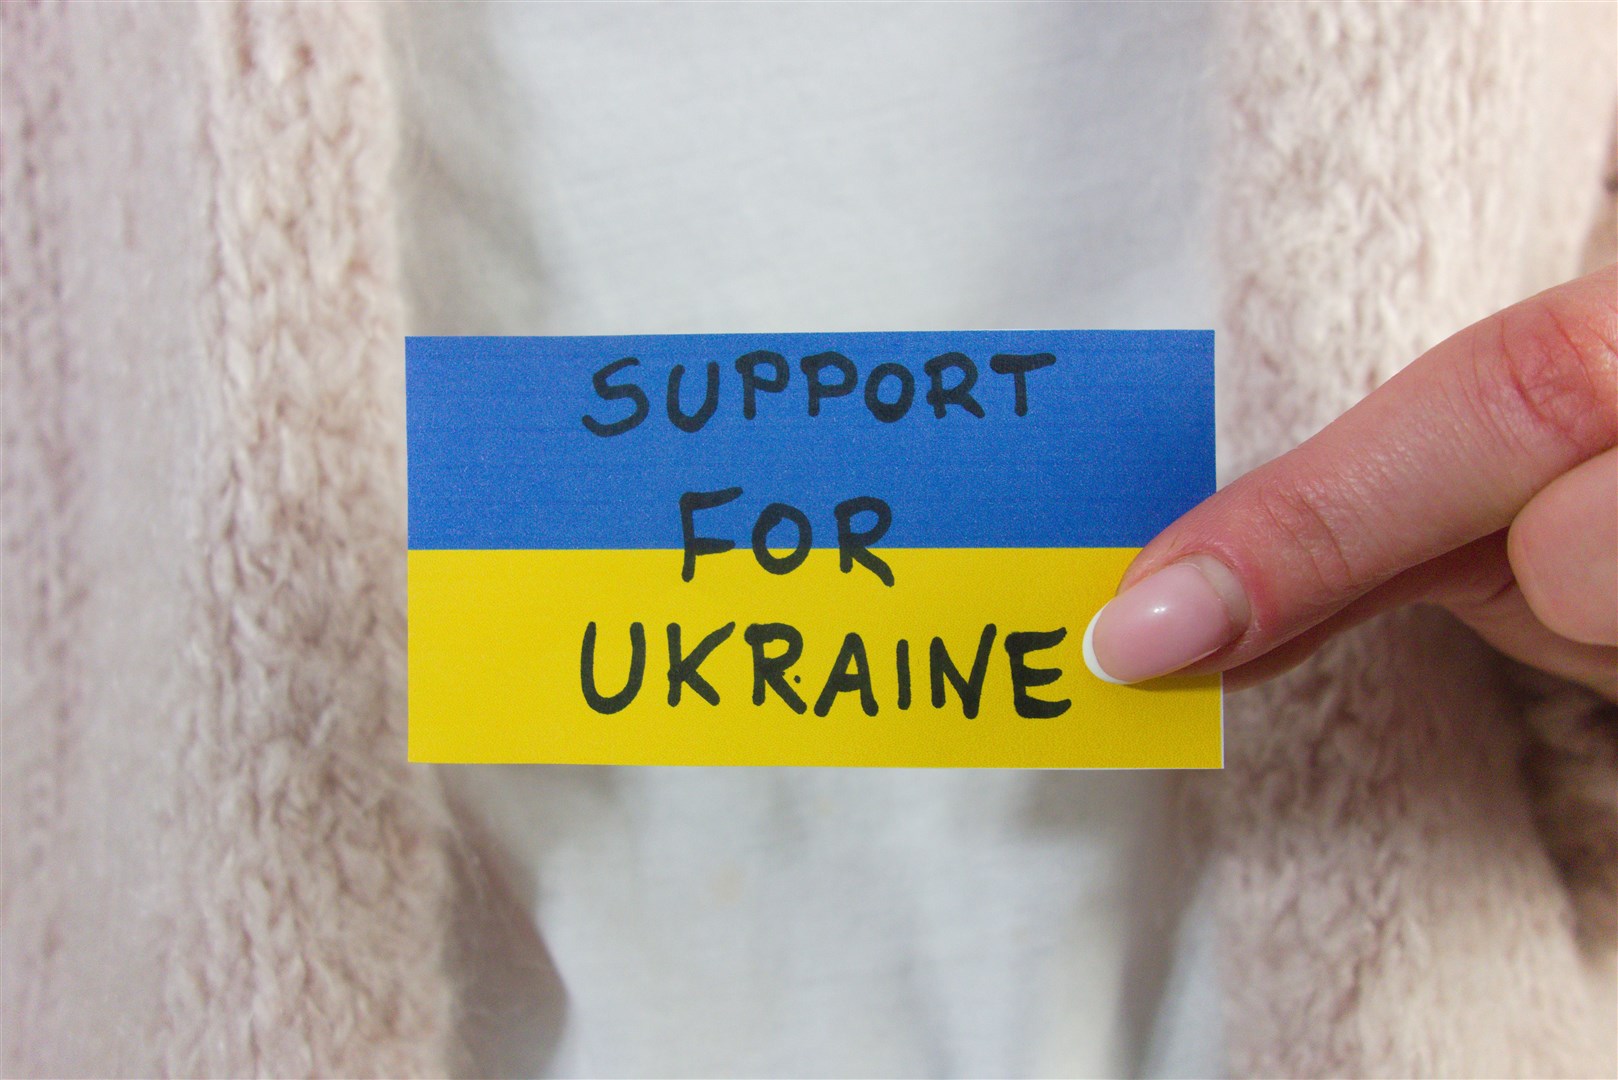 The restaurant is one of many businesses and individuals doing their bit for Ukraine.